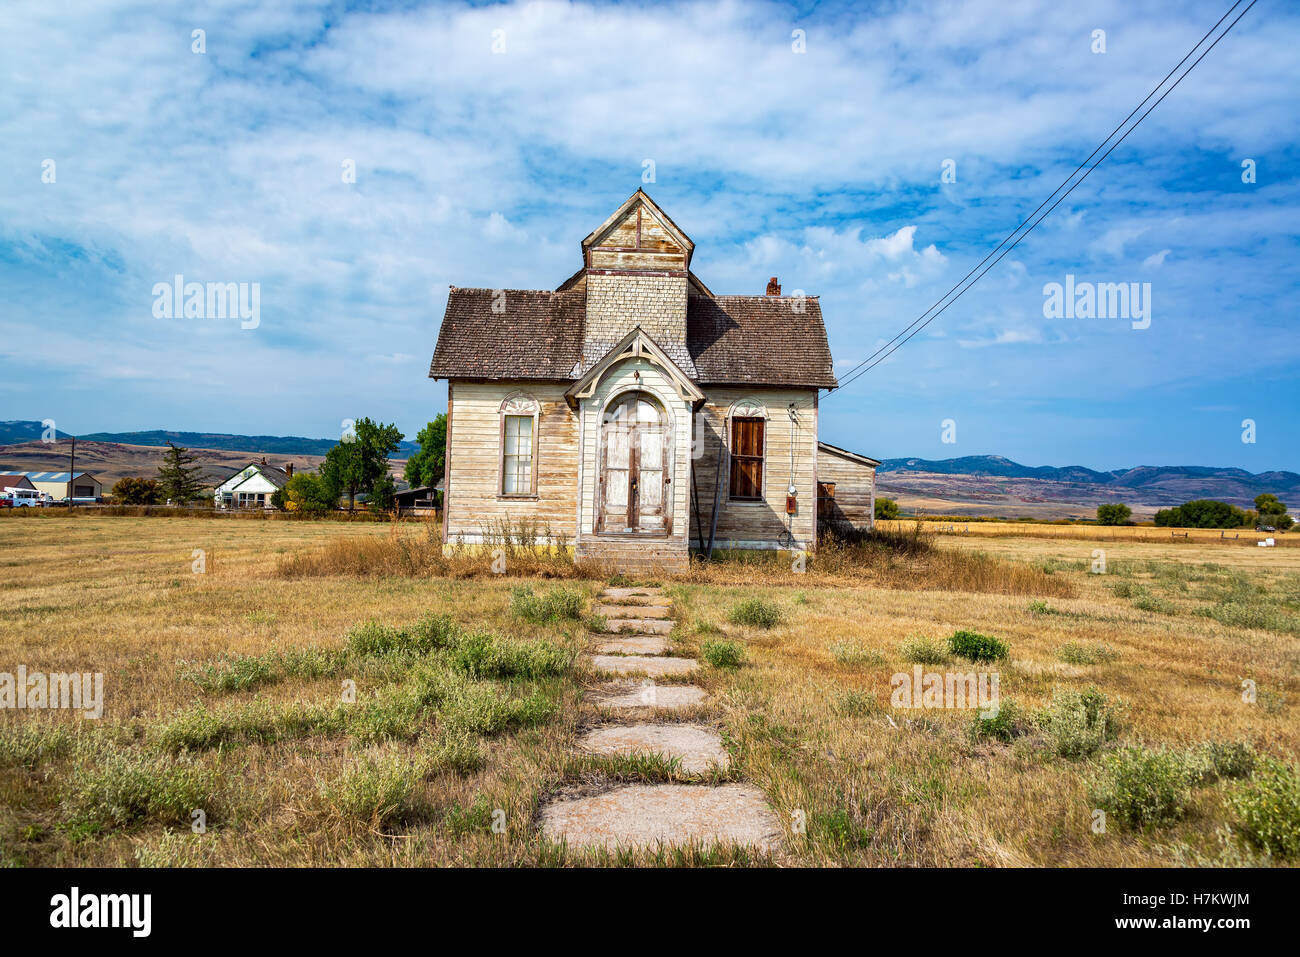 Old abandoned house in the small town of Ovid, Idaho Stock Photo